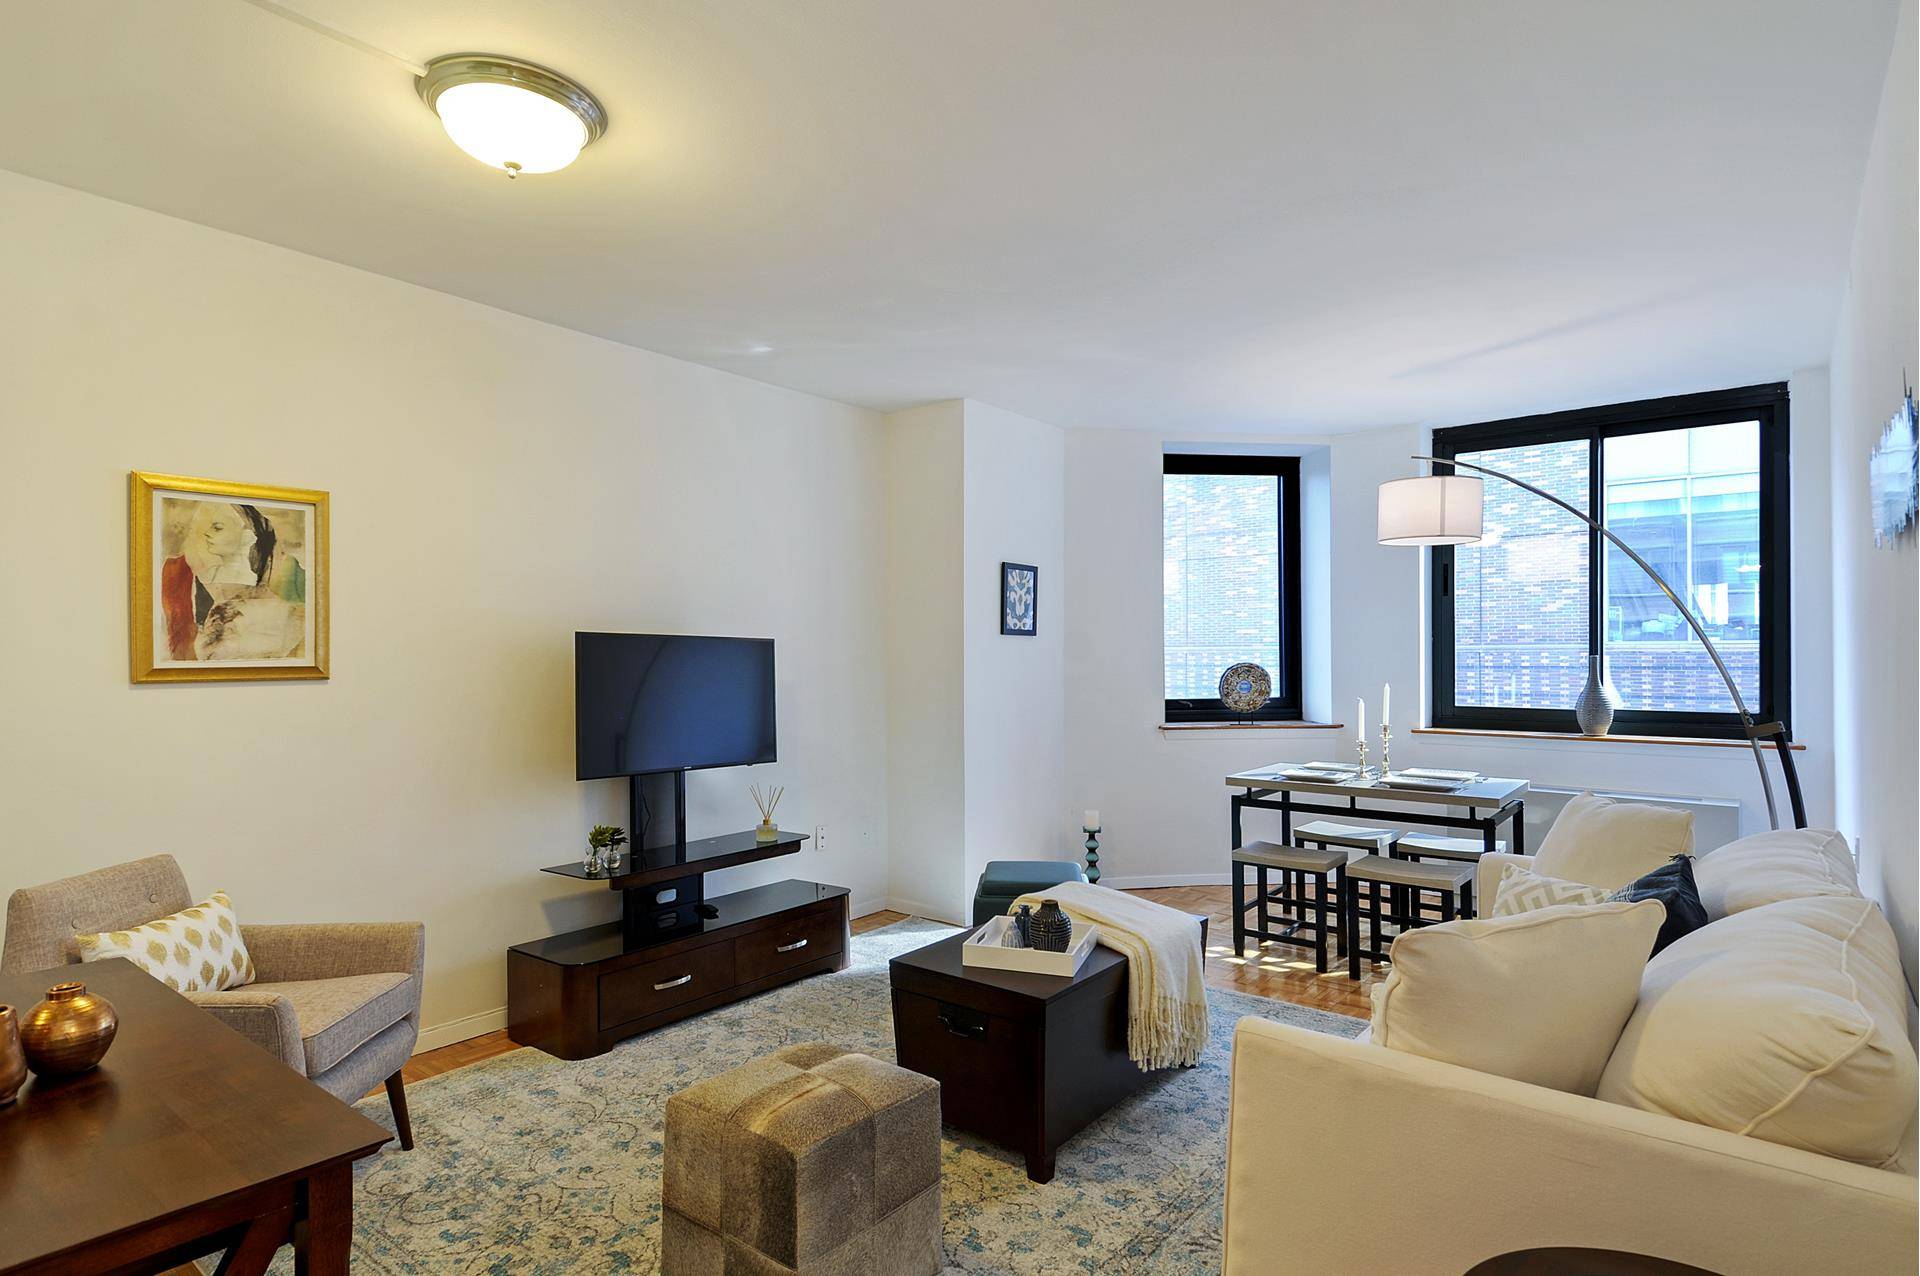 Sun drenched Massive One Bedroom Condo includes a living room large enough for a dining area, a high end kitchen renovation with granite counter tops, Sub Zero refrigerator, Bosch dishwasher, ...